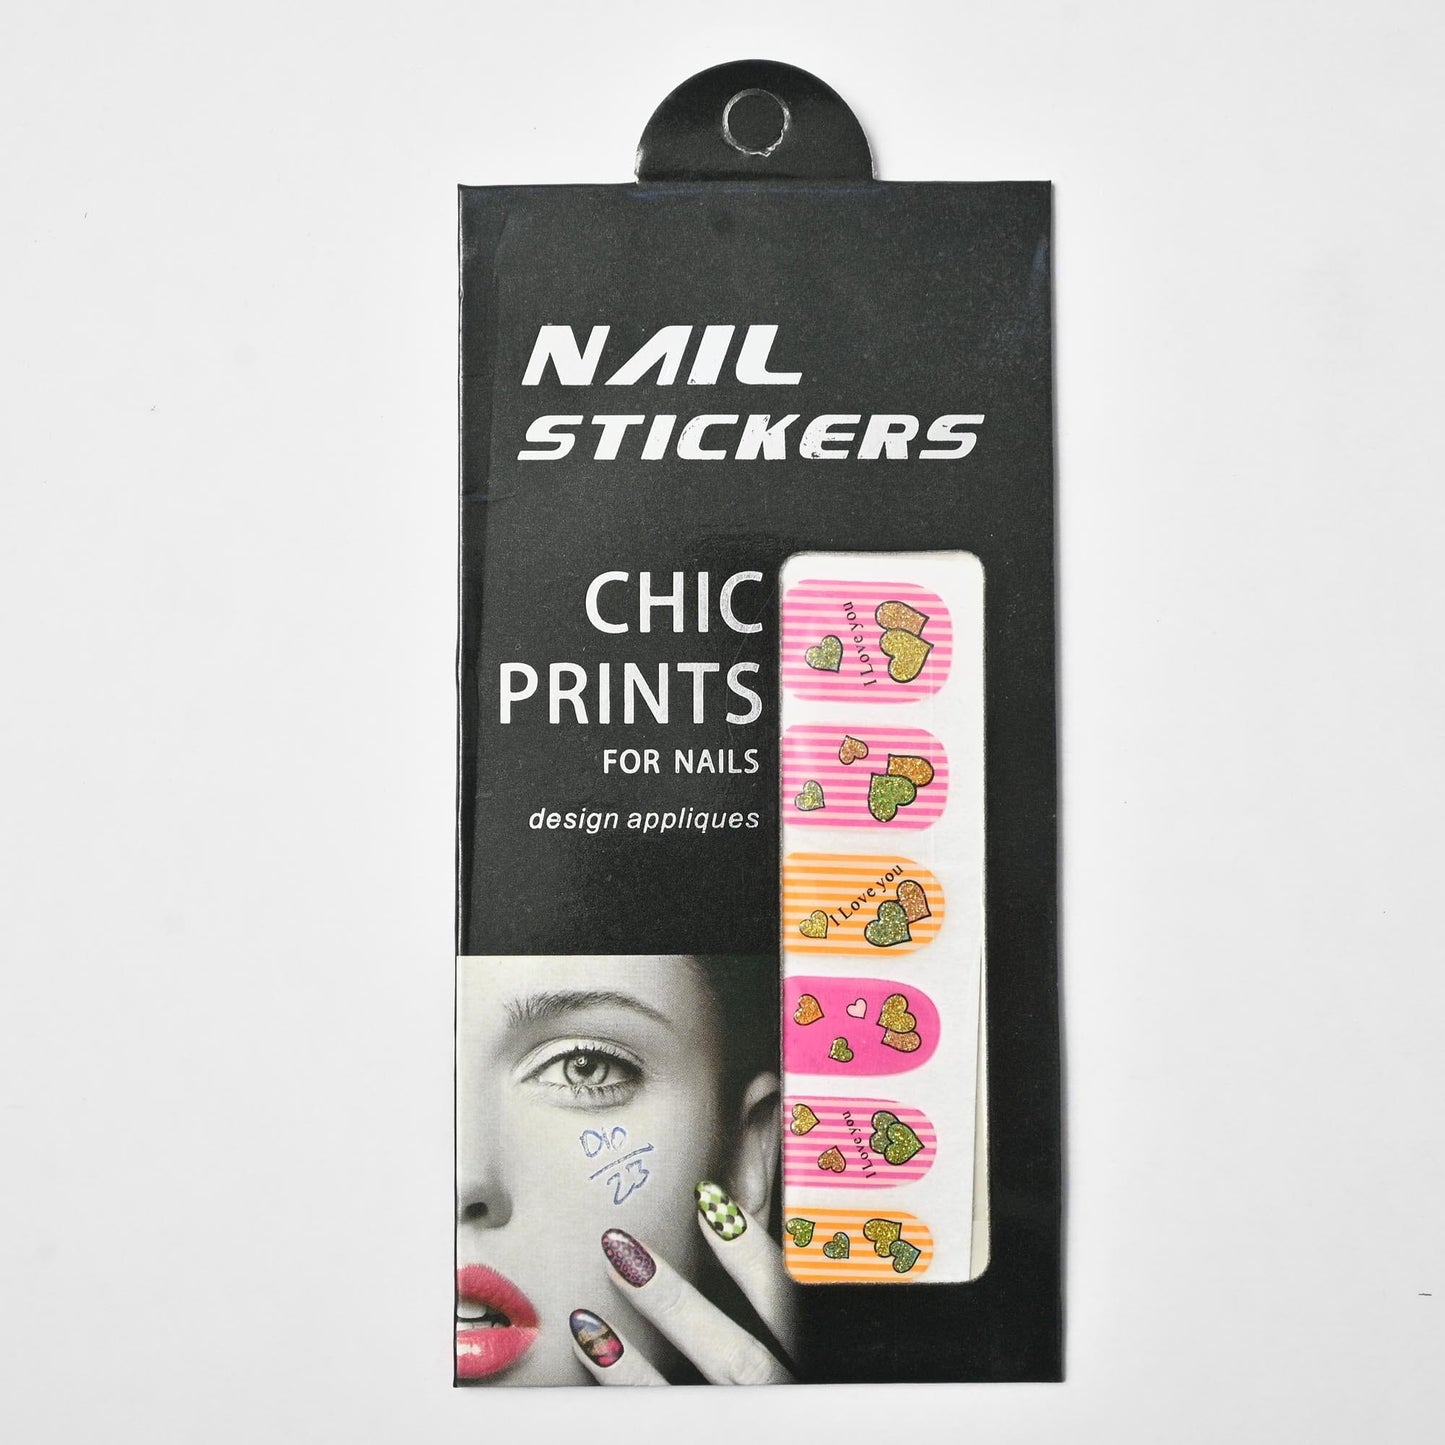 Chic Prints Women's Nail Stickers - Pack Of 12 Health & Beauty SRL D10 